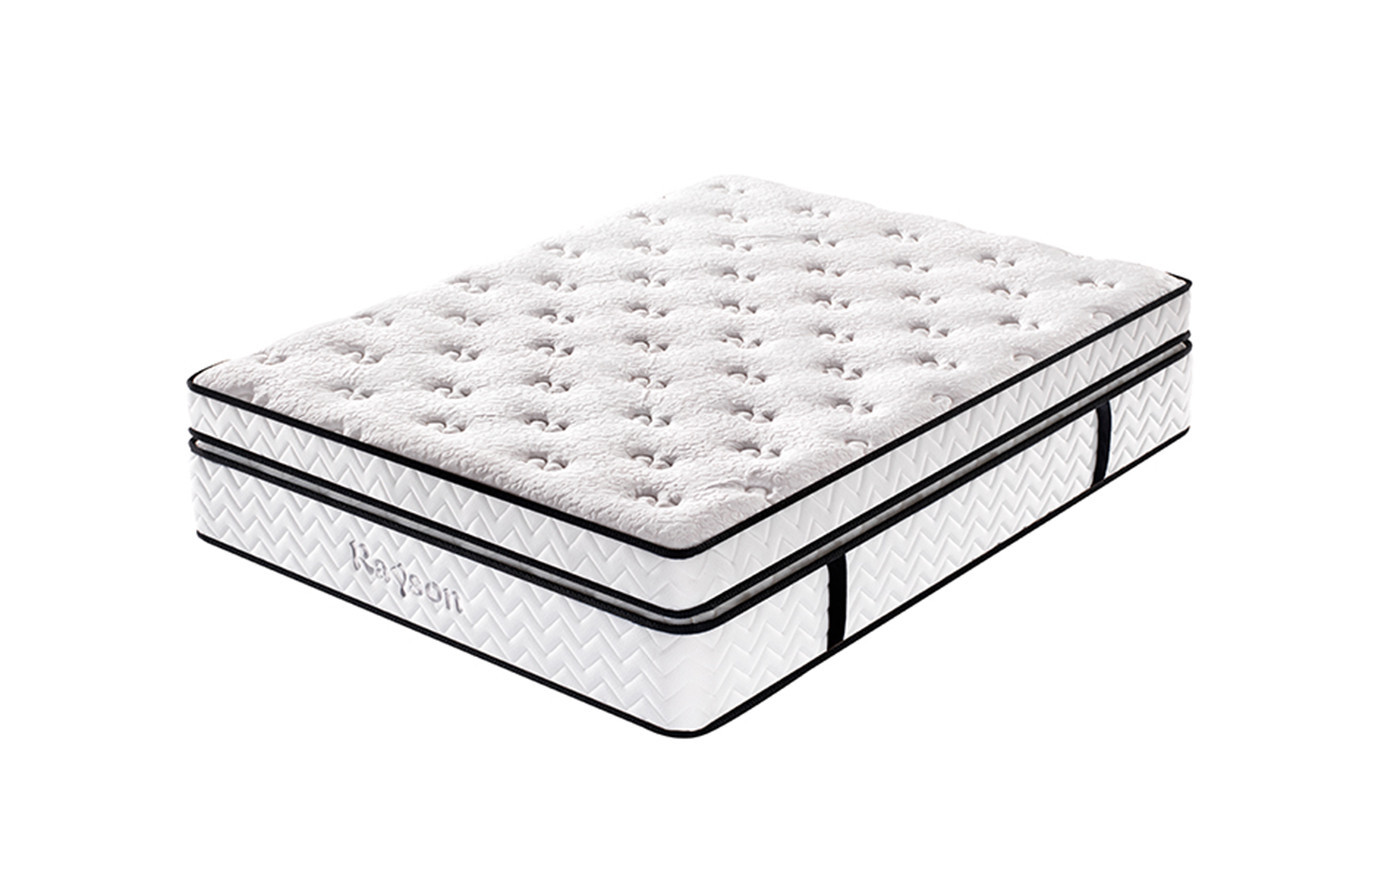 Synwin luxury mattress in 5 star hotels innerspring for sleep